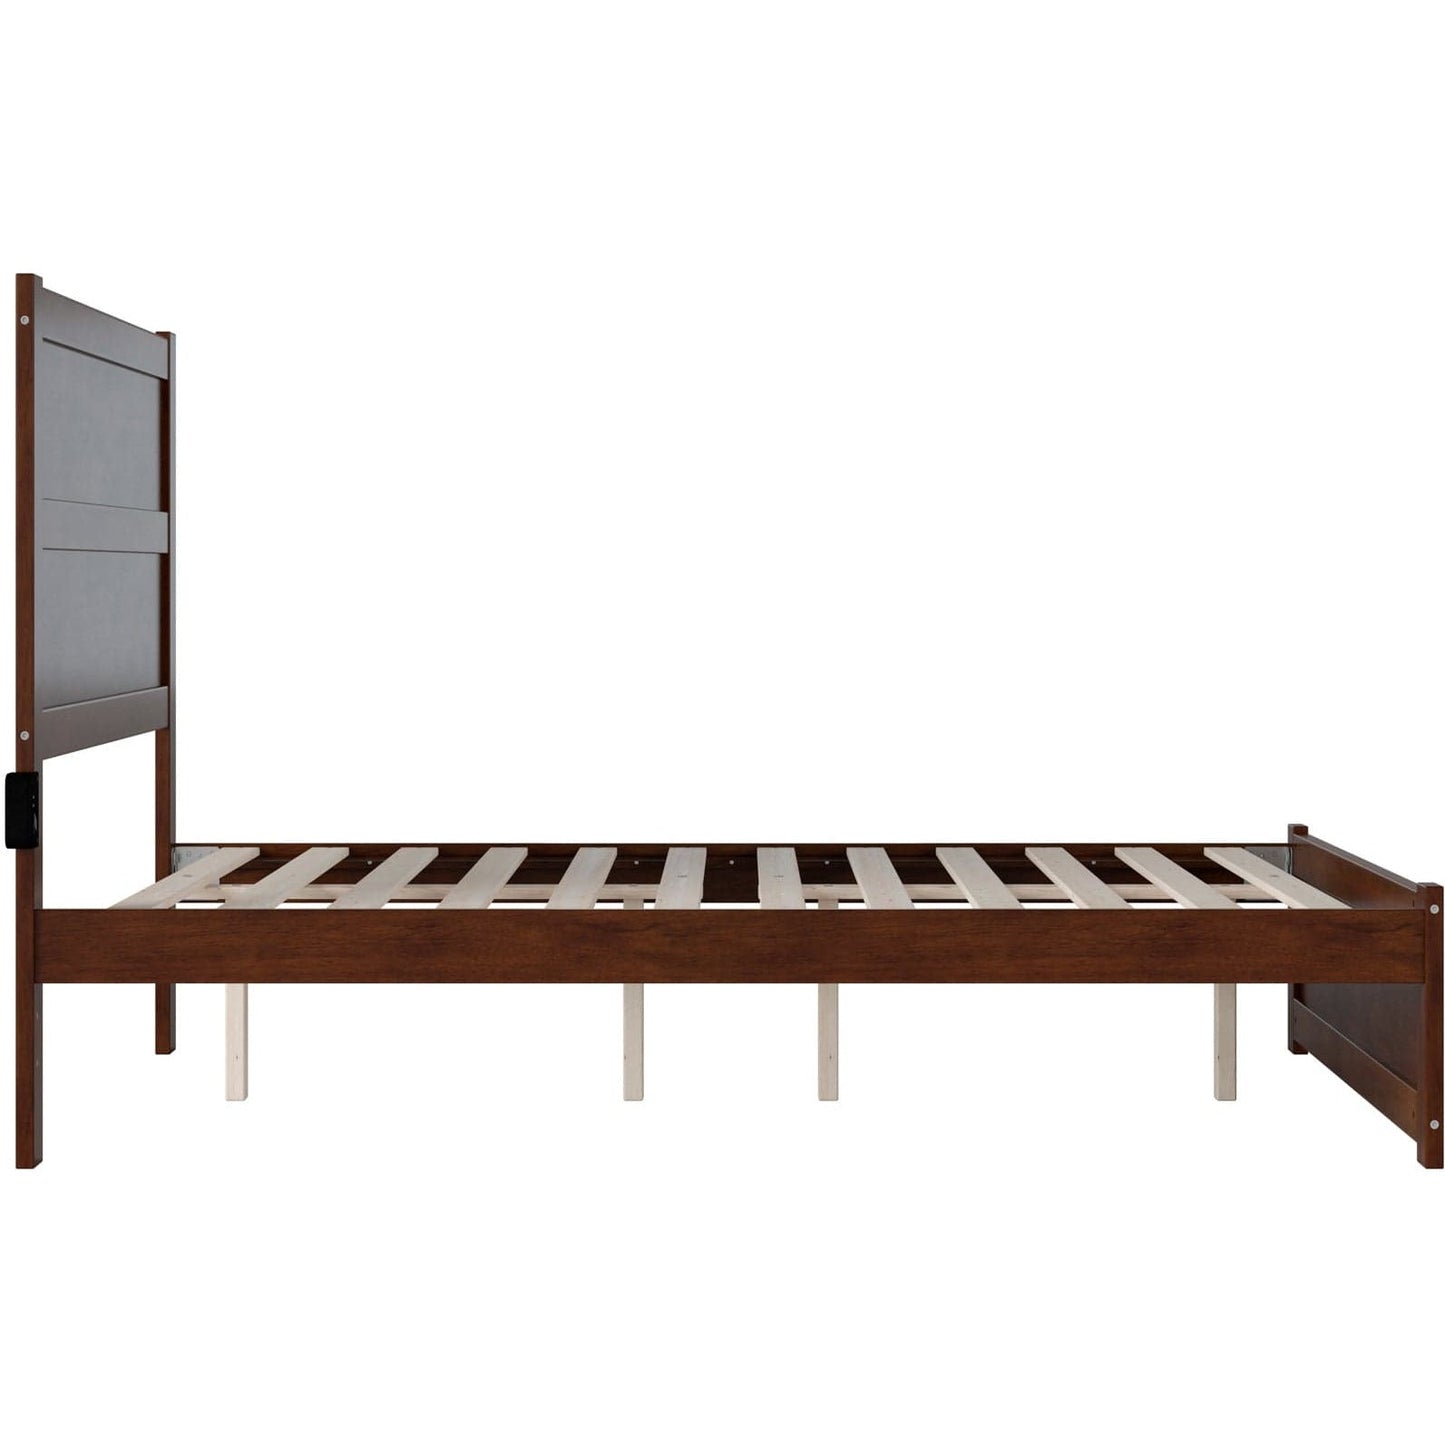 AFI Furnishings NoHo Full Bed with Footboard in Walnut AG9160034